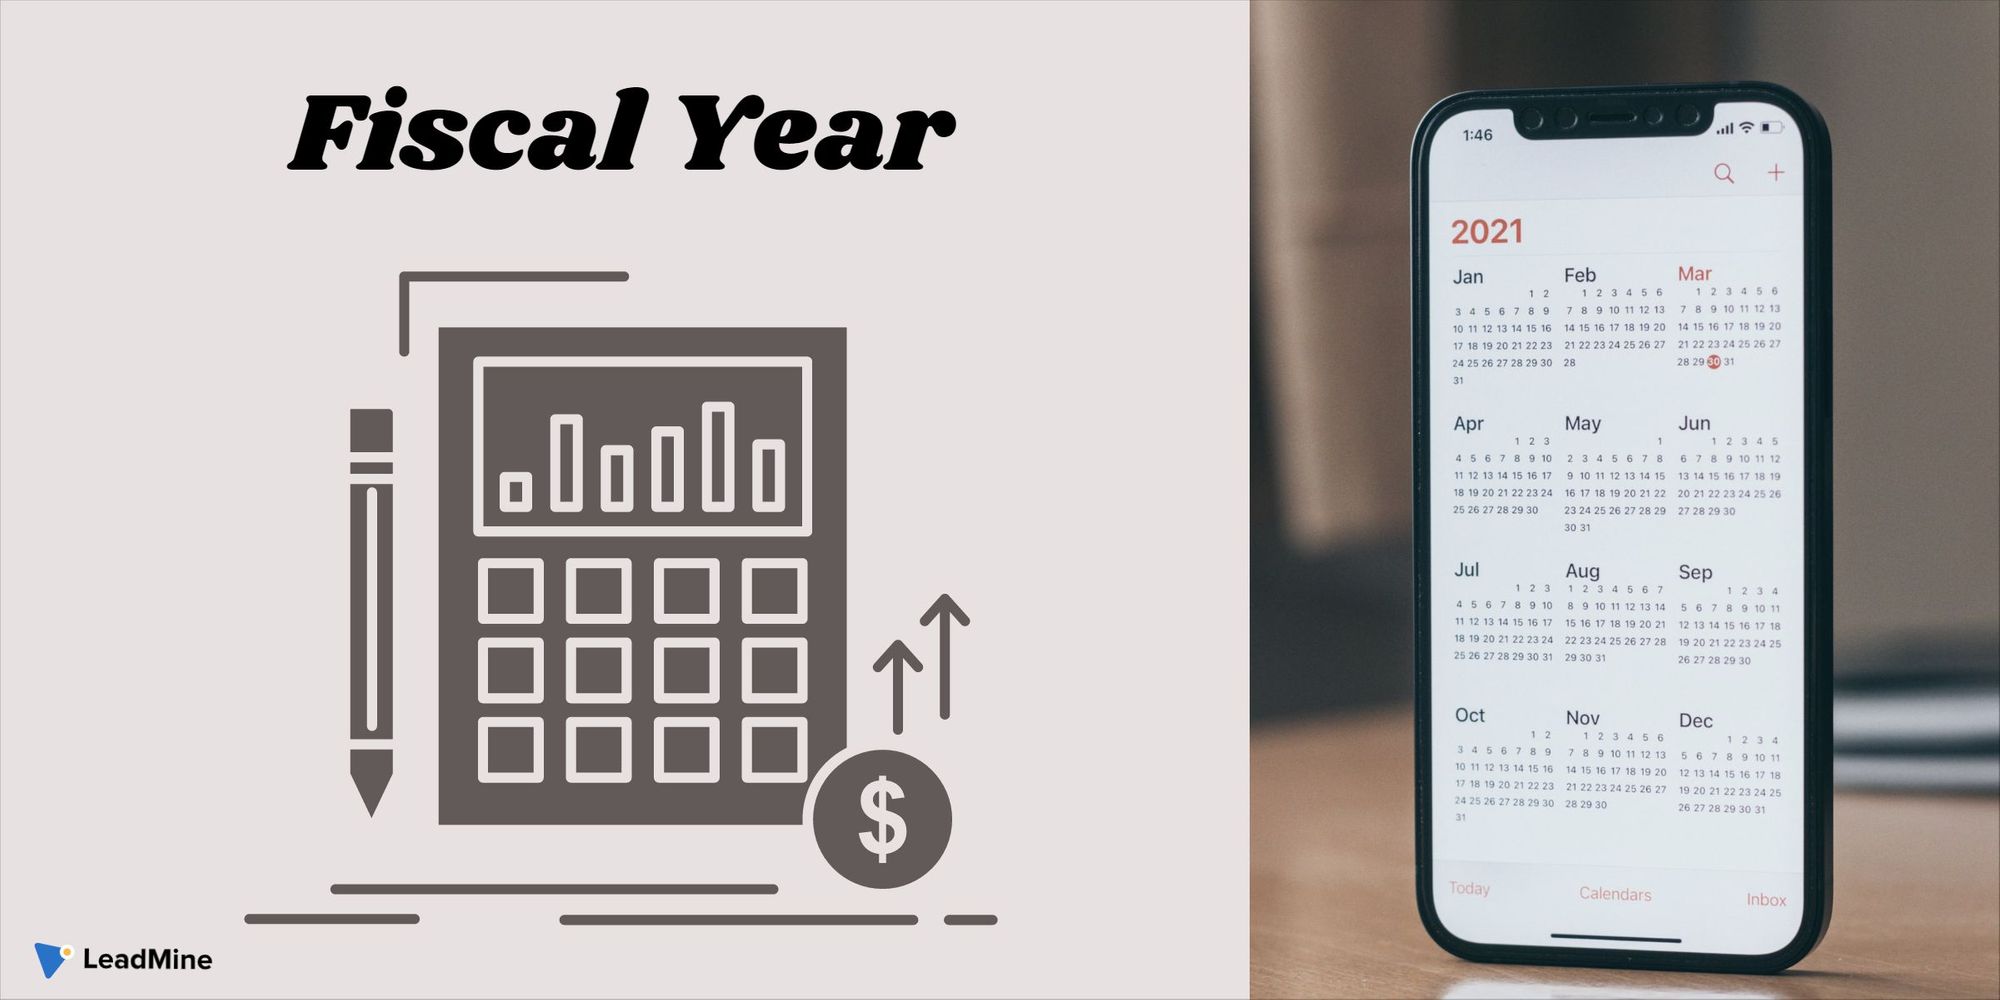 Fiscal Year Definition, Types, Tax Year vs Fiscal Year, and Best Date